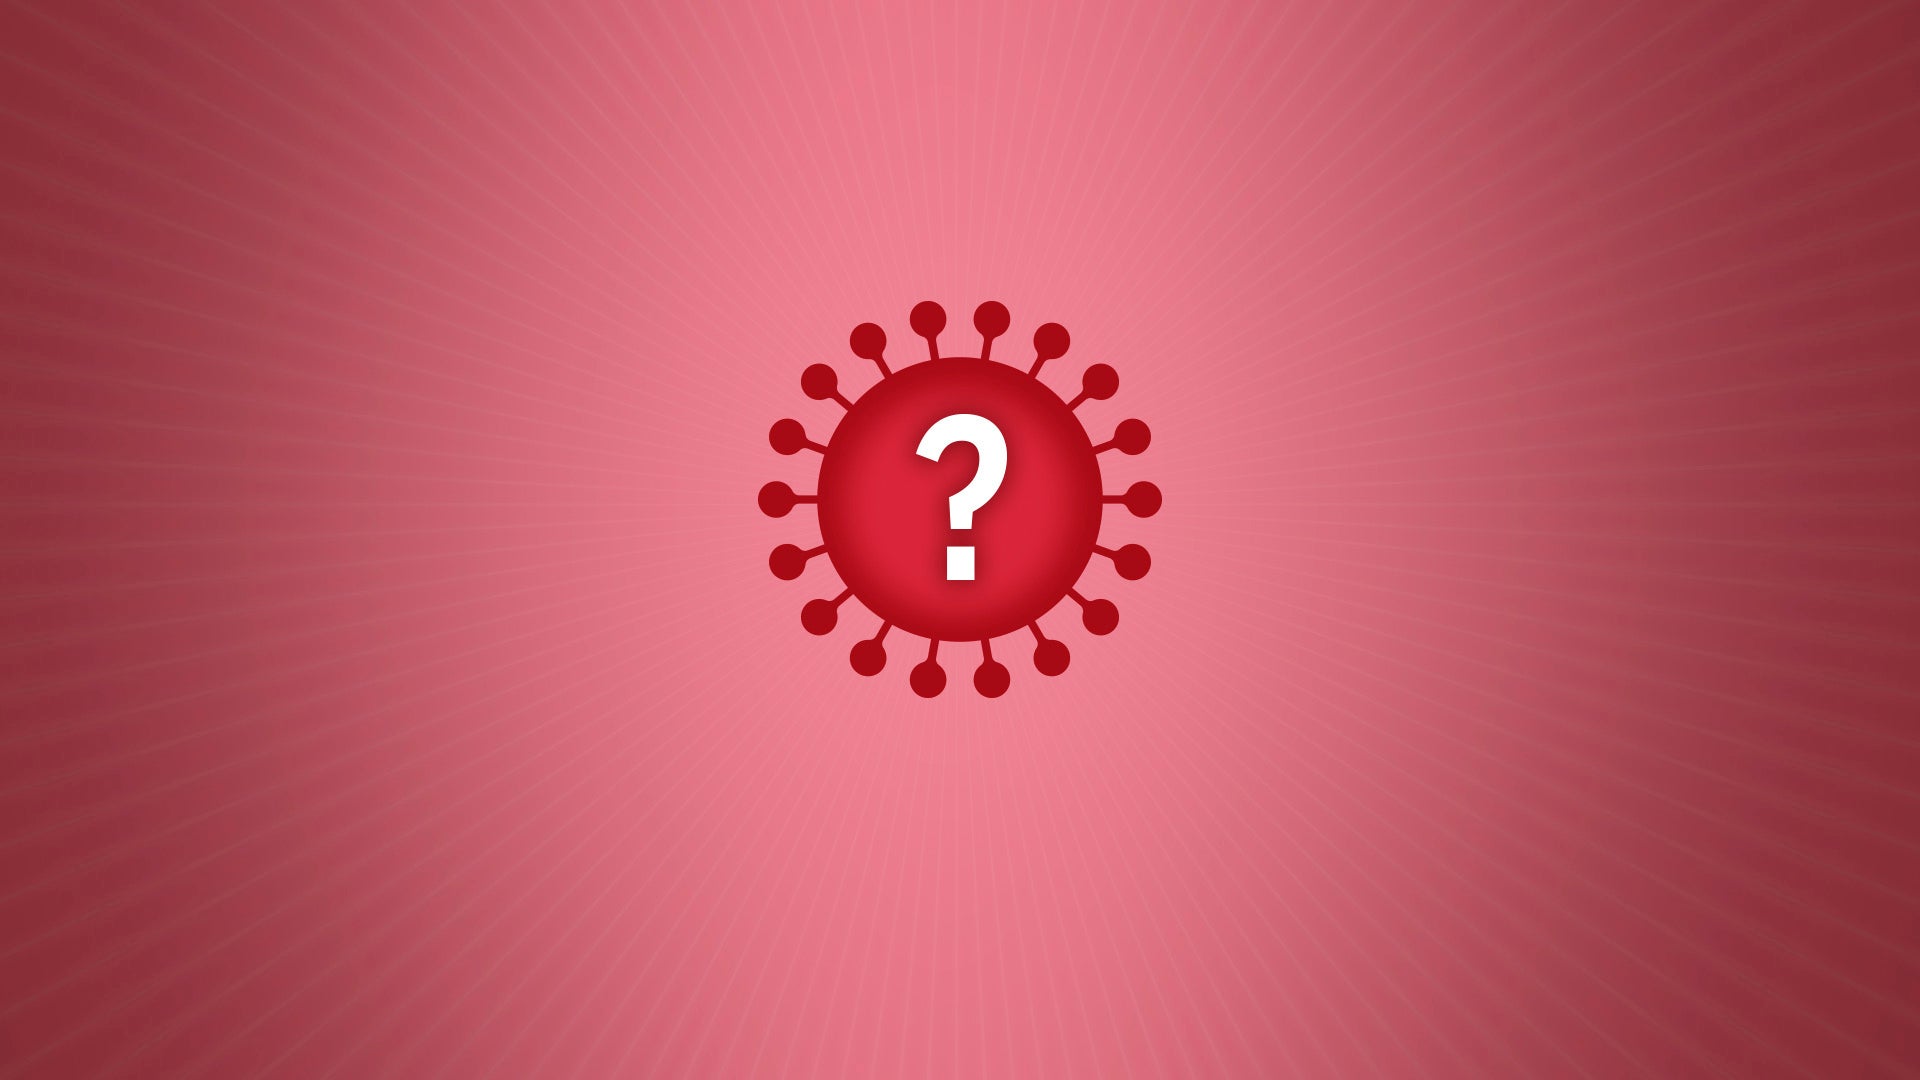 Virus Outbreak-Viral Questions-Long COVID